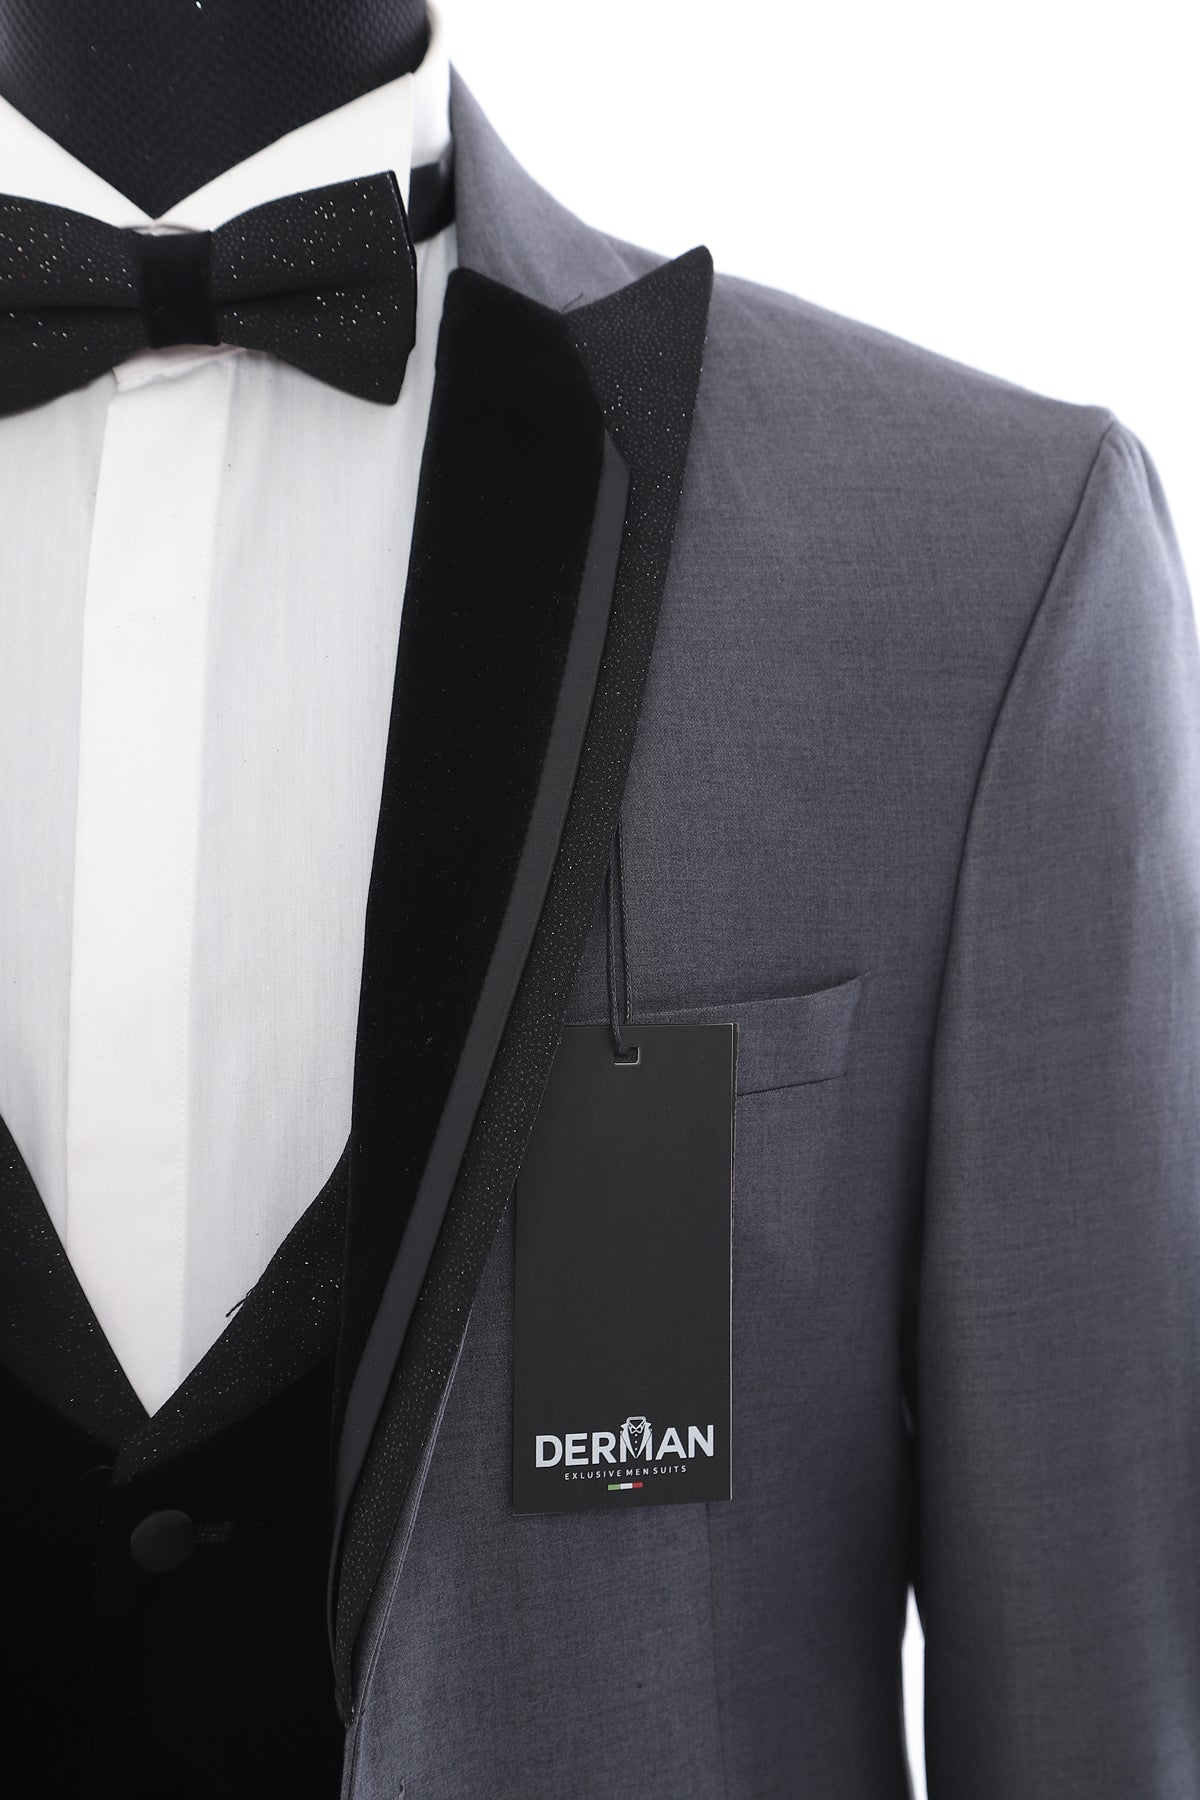 Double Breasted Classic Silvery Collar Grey Tuxedo